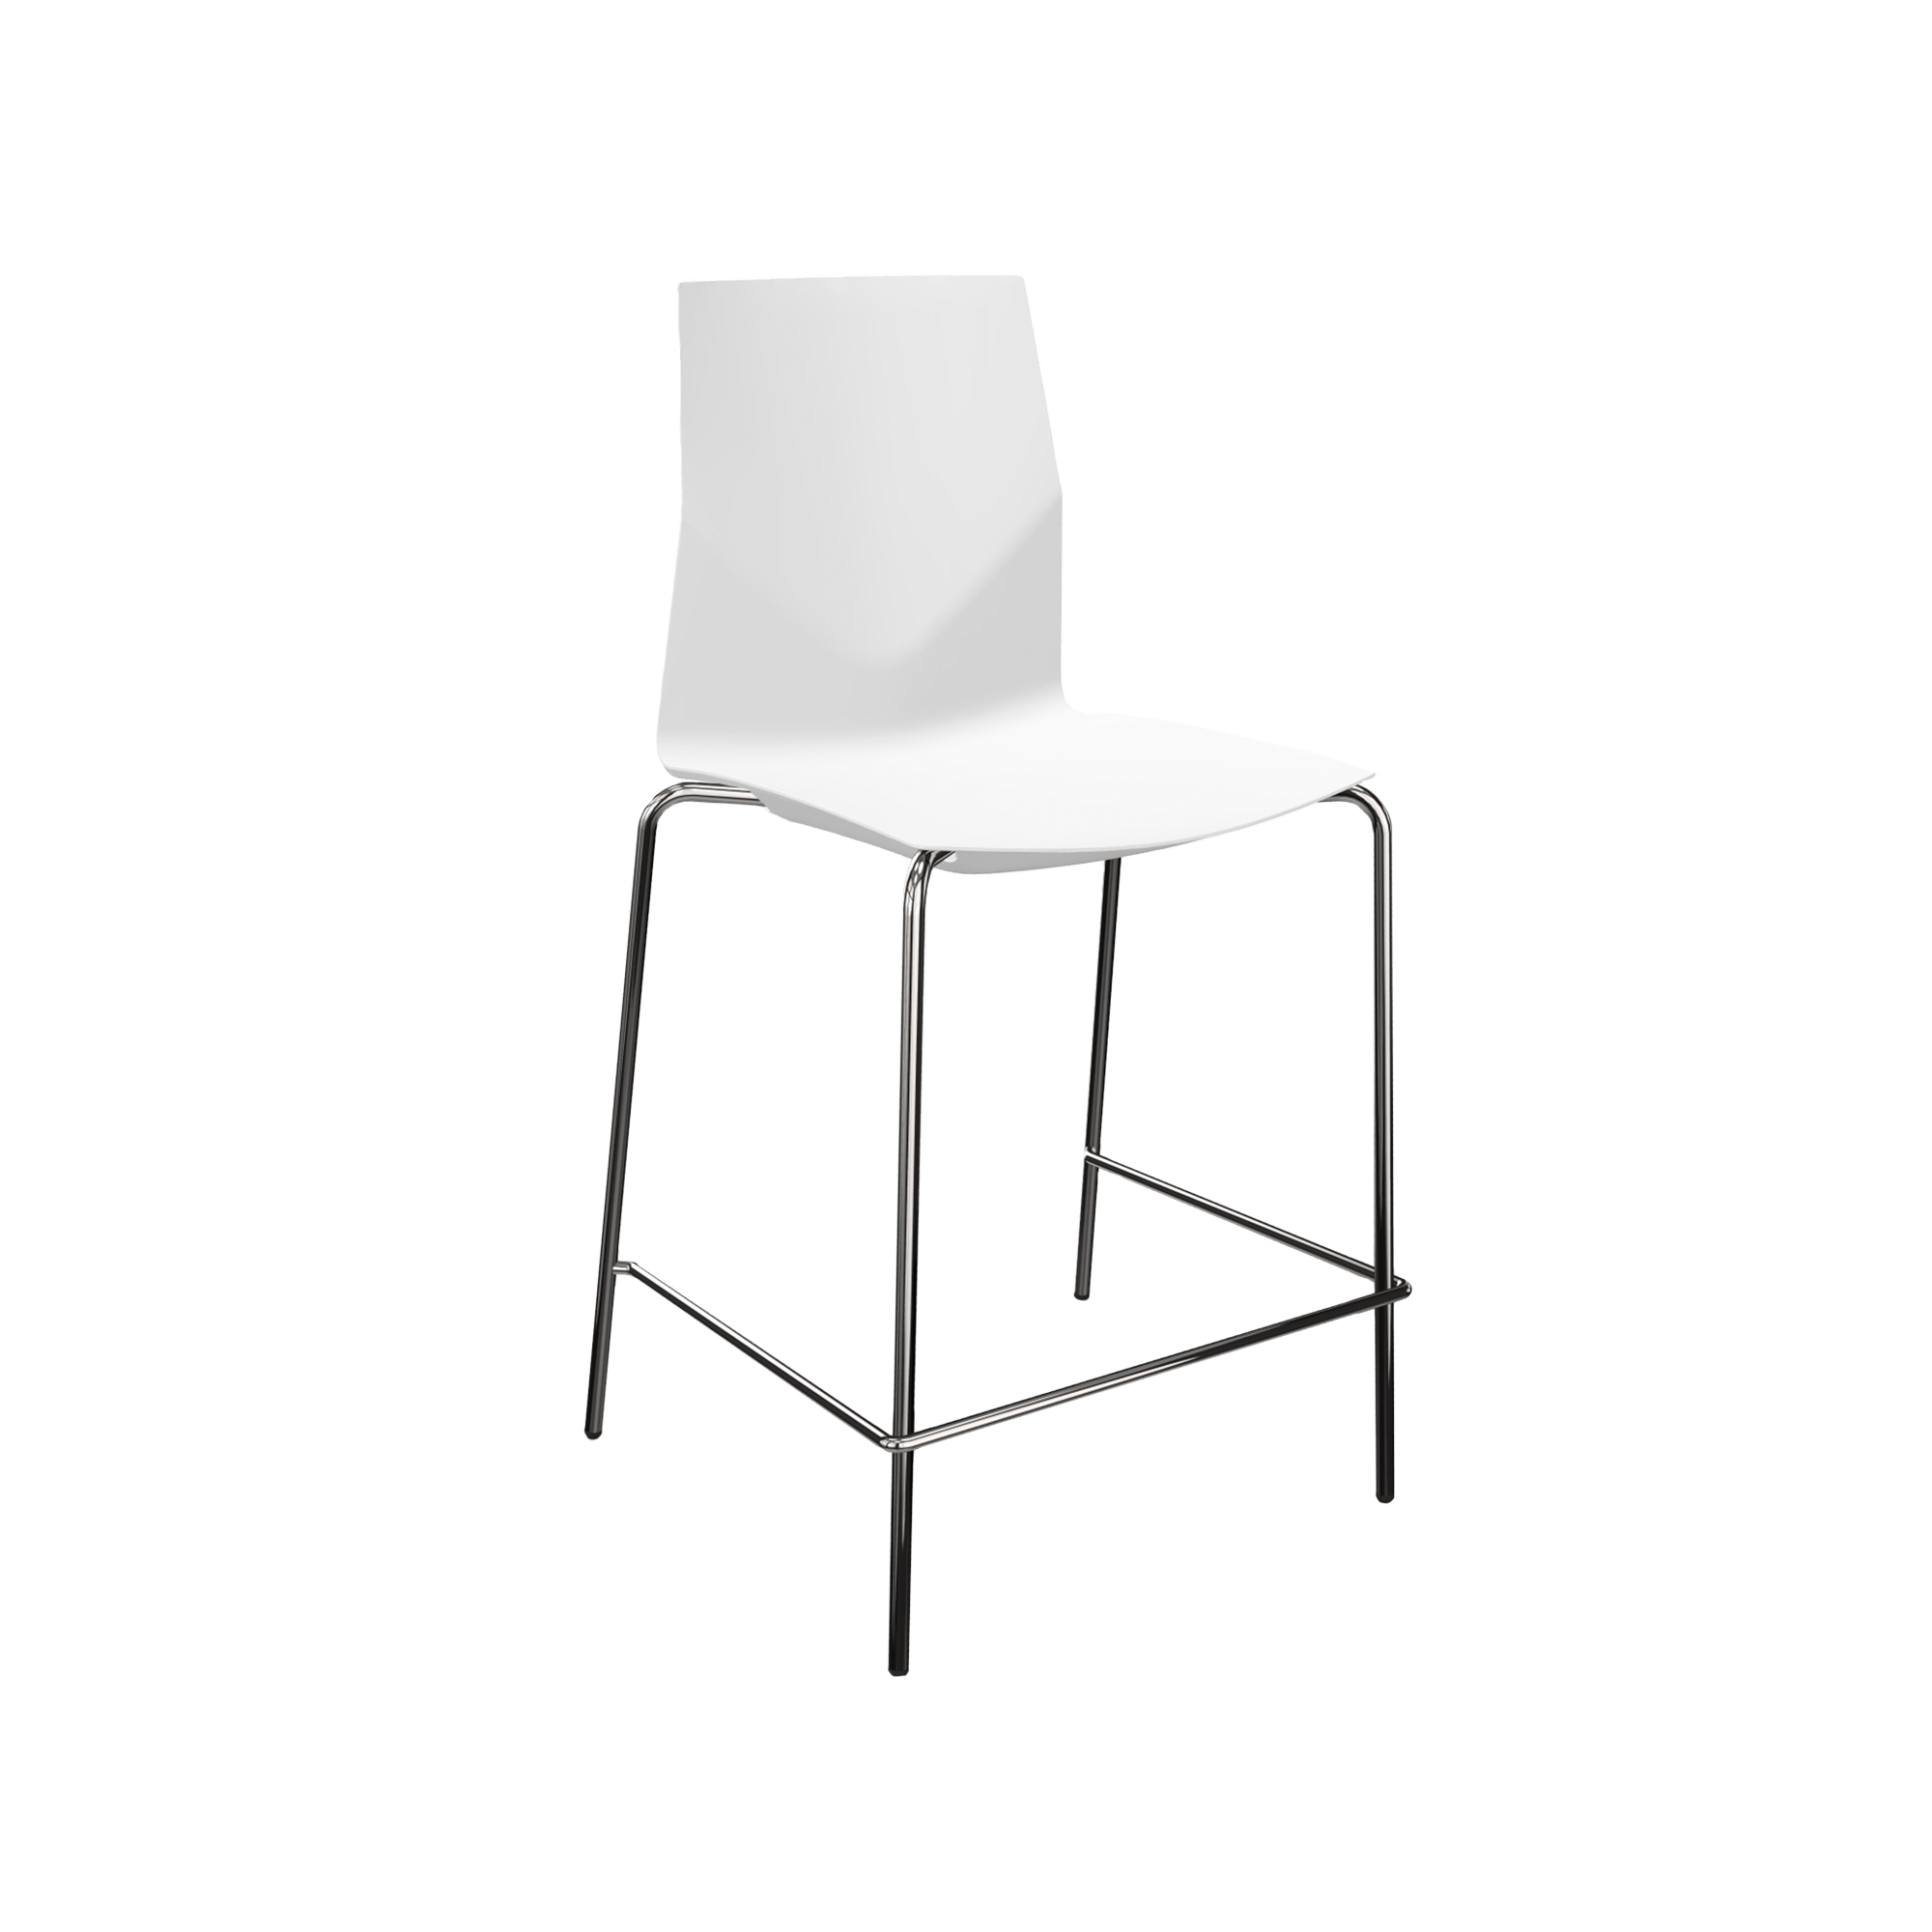 Mid height counter chair with a white seat and 4 chrome legs